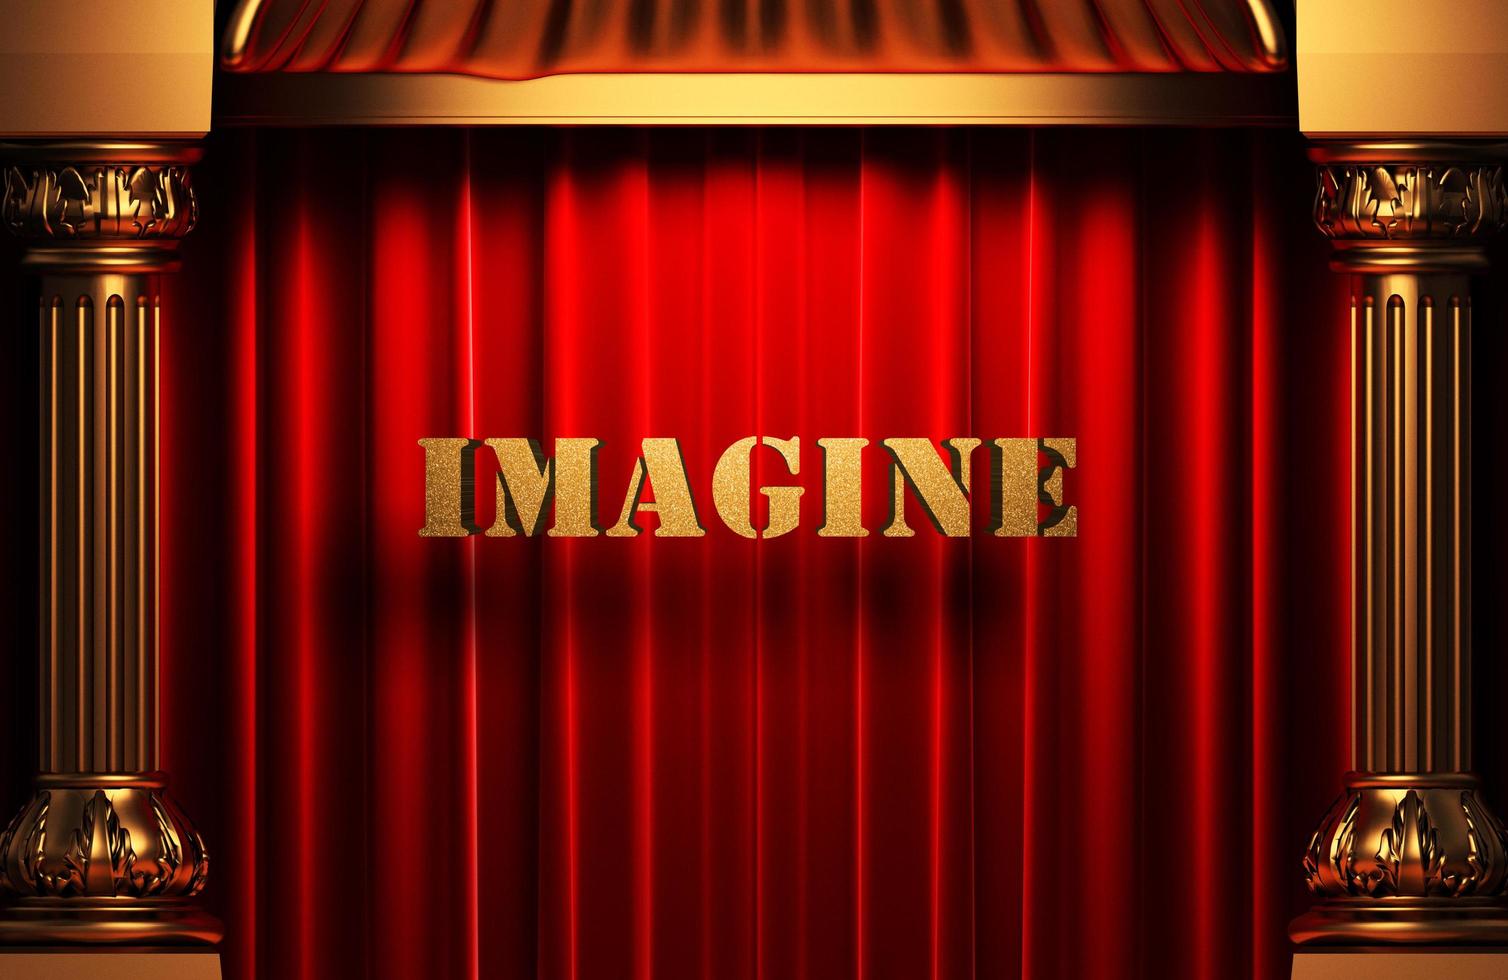 imagine golden word on red curtain photo